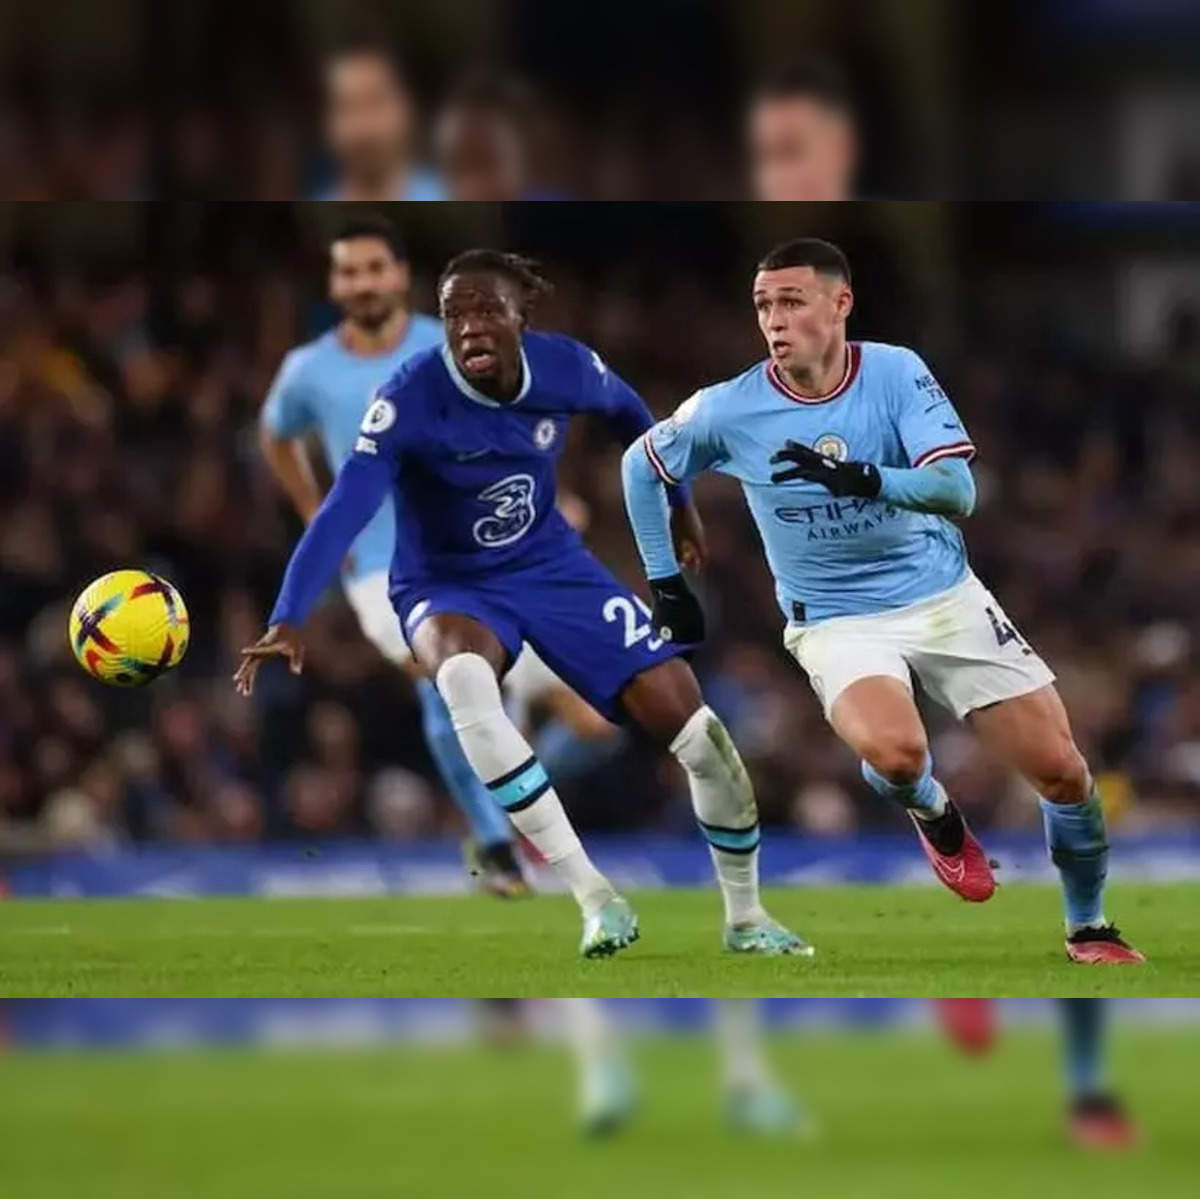 man city vs chelsea Manchester City vs Chelsea live streaming Prediction, kick off, where to watch Premier League match